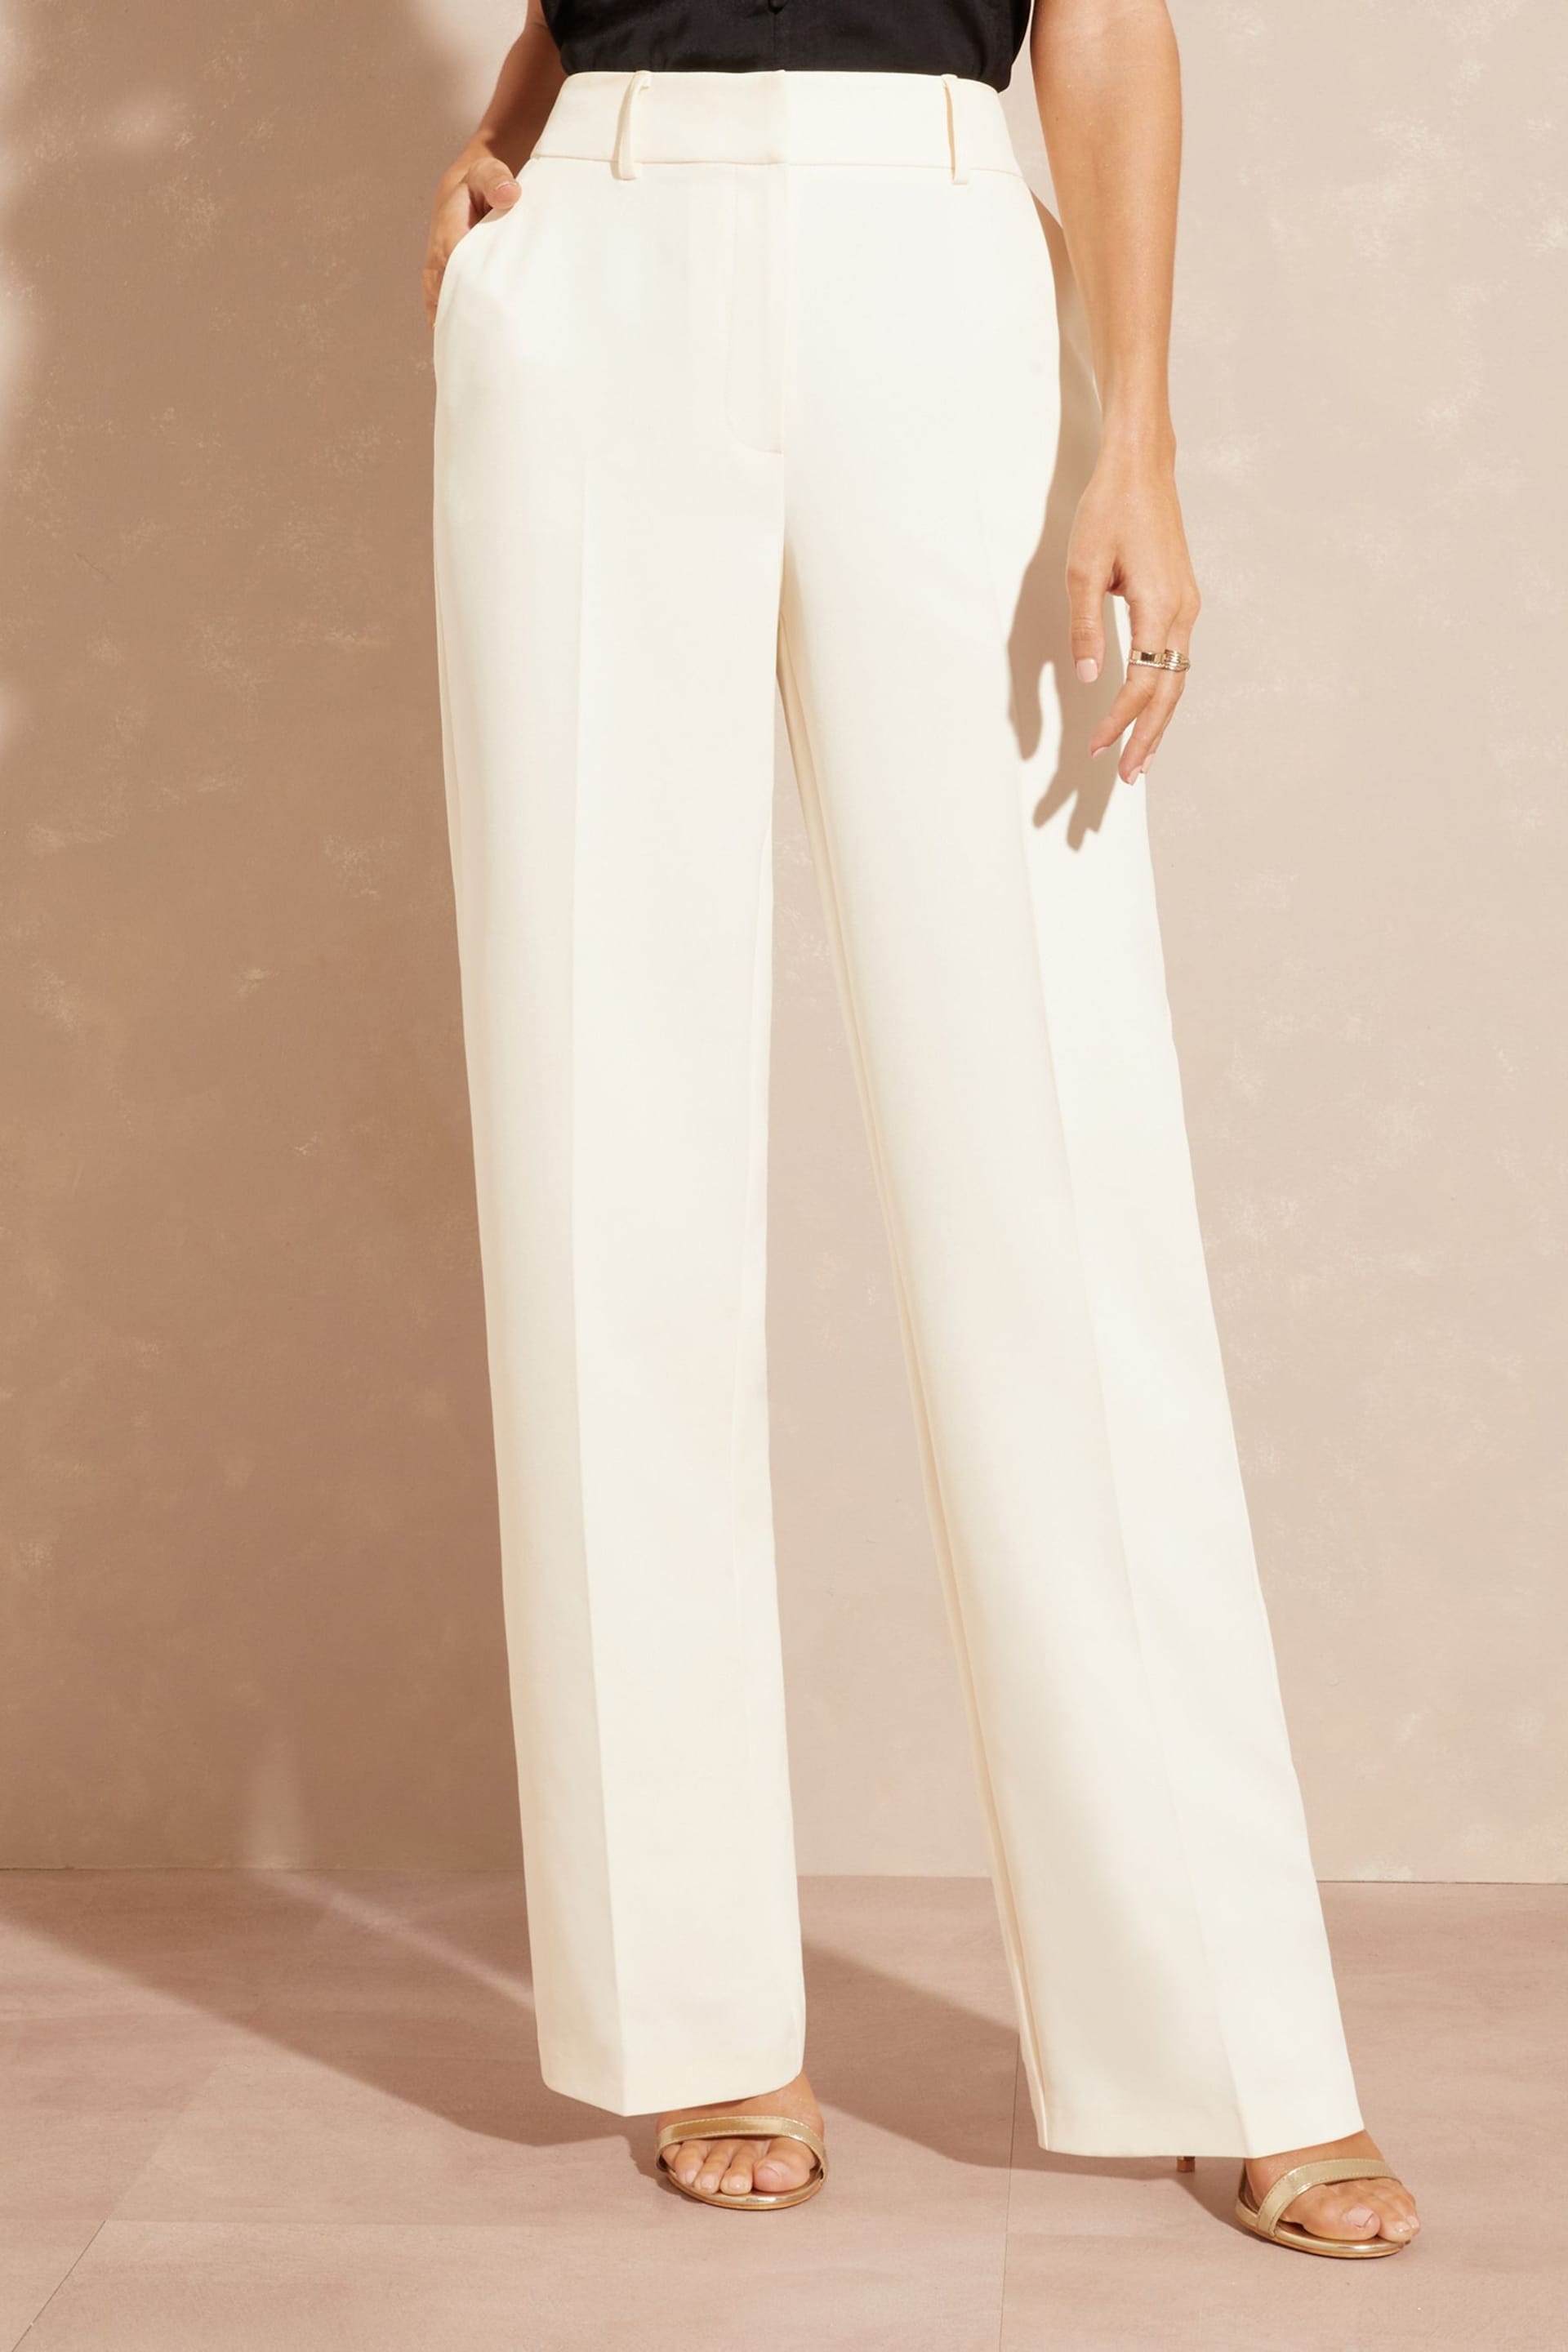 Love & Roses Ivory White High Waist Wide Leg Tailored Trousers - Image 1 of 4